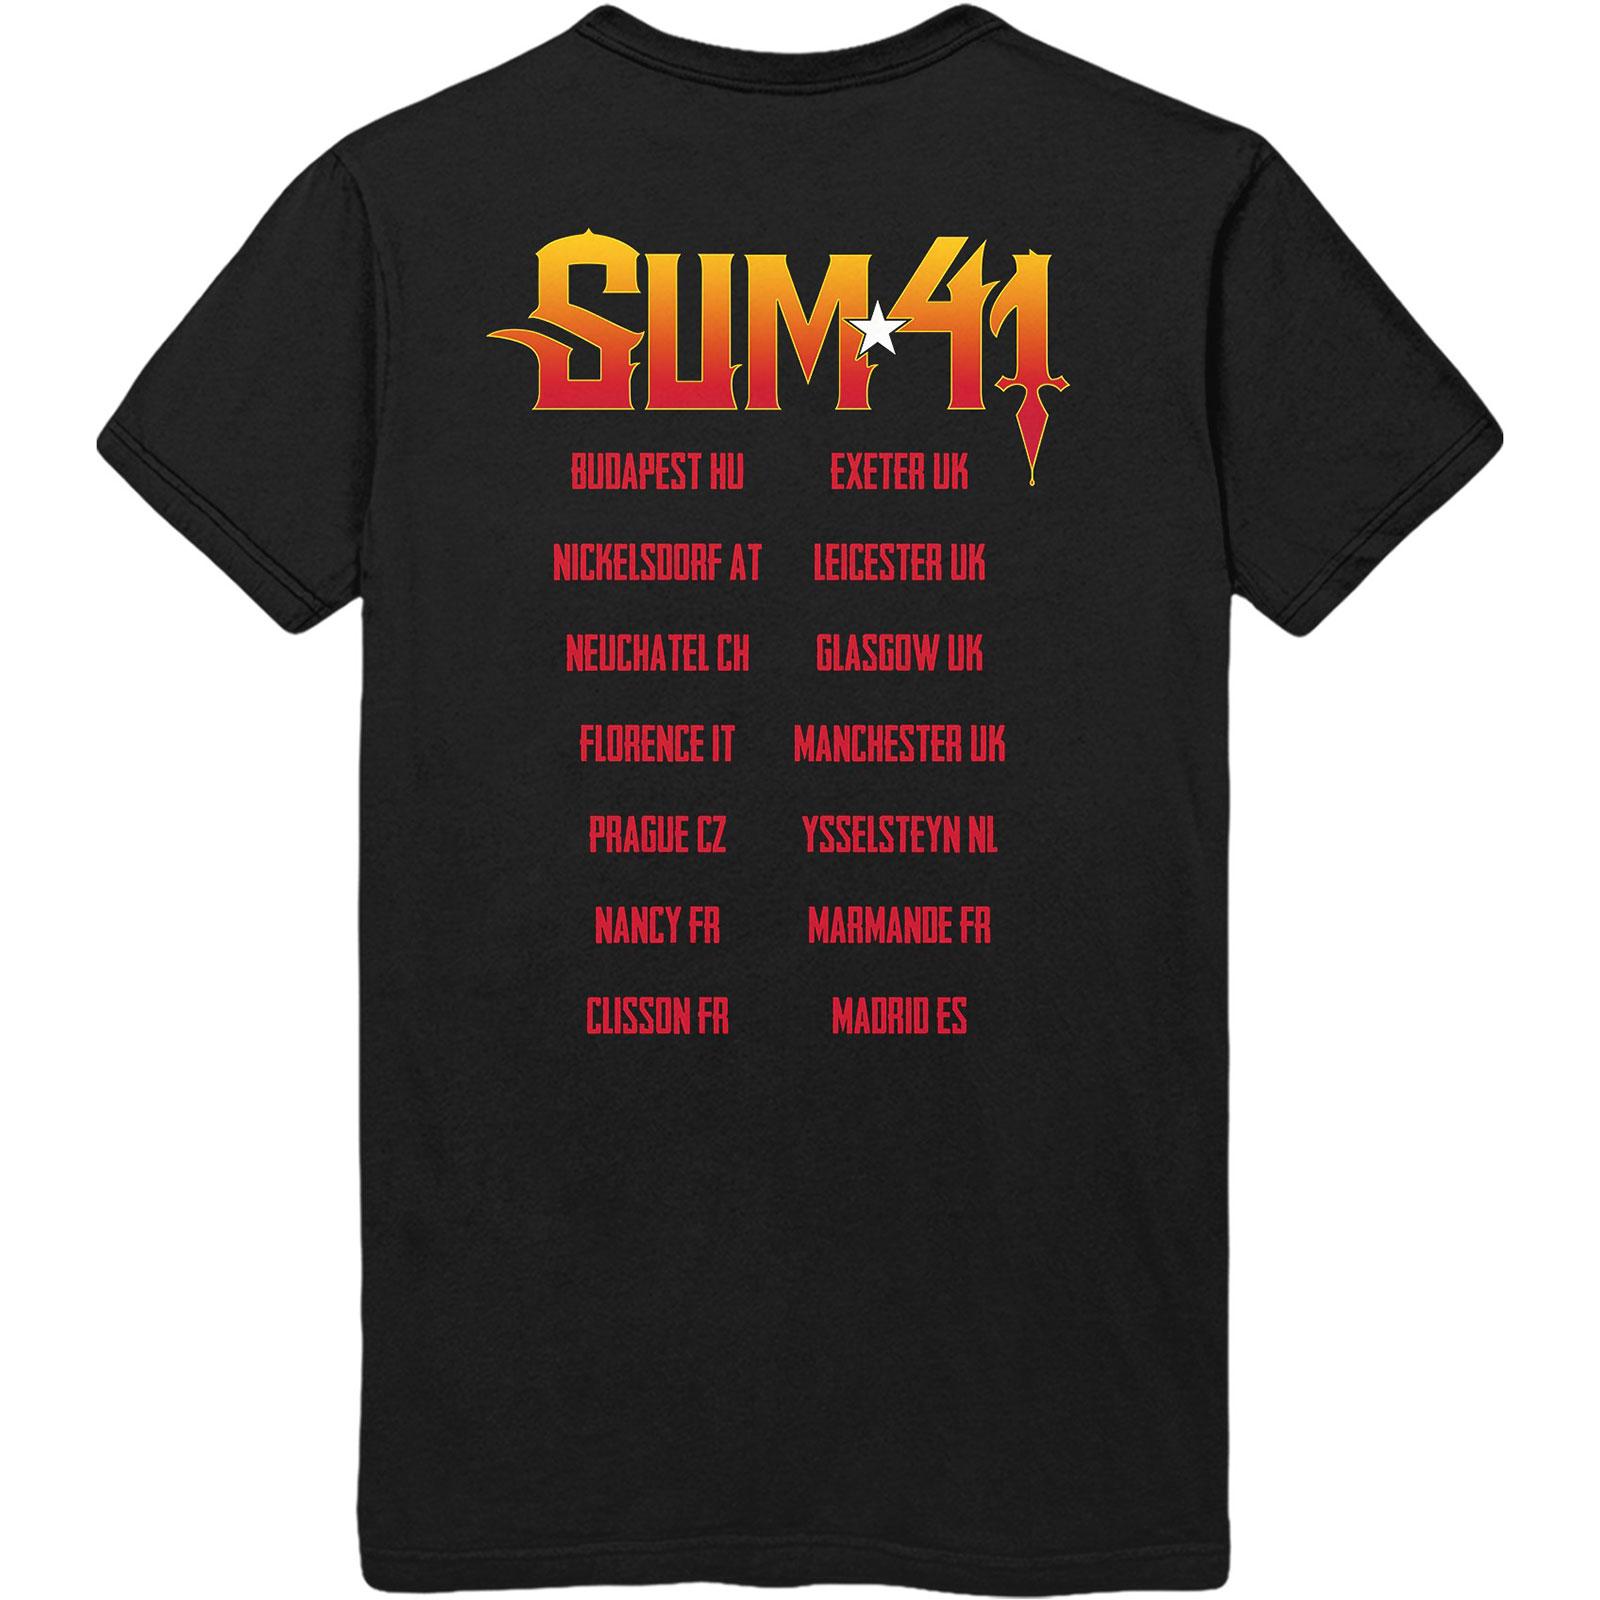 T-shirt Sum 41 Out For Blood